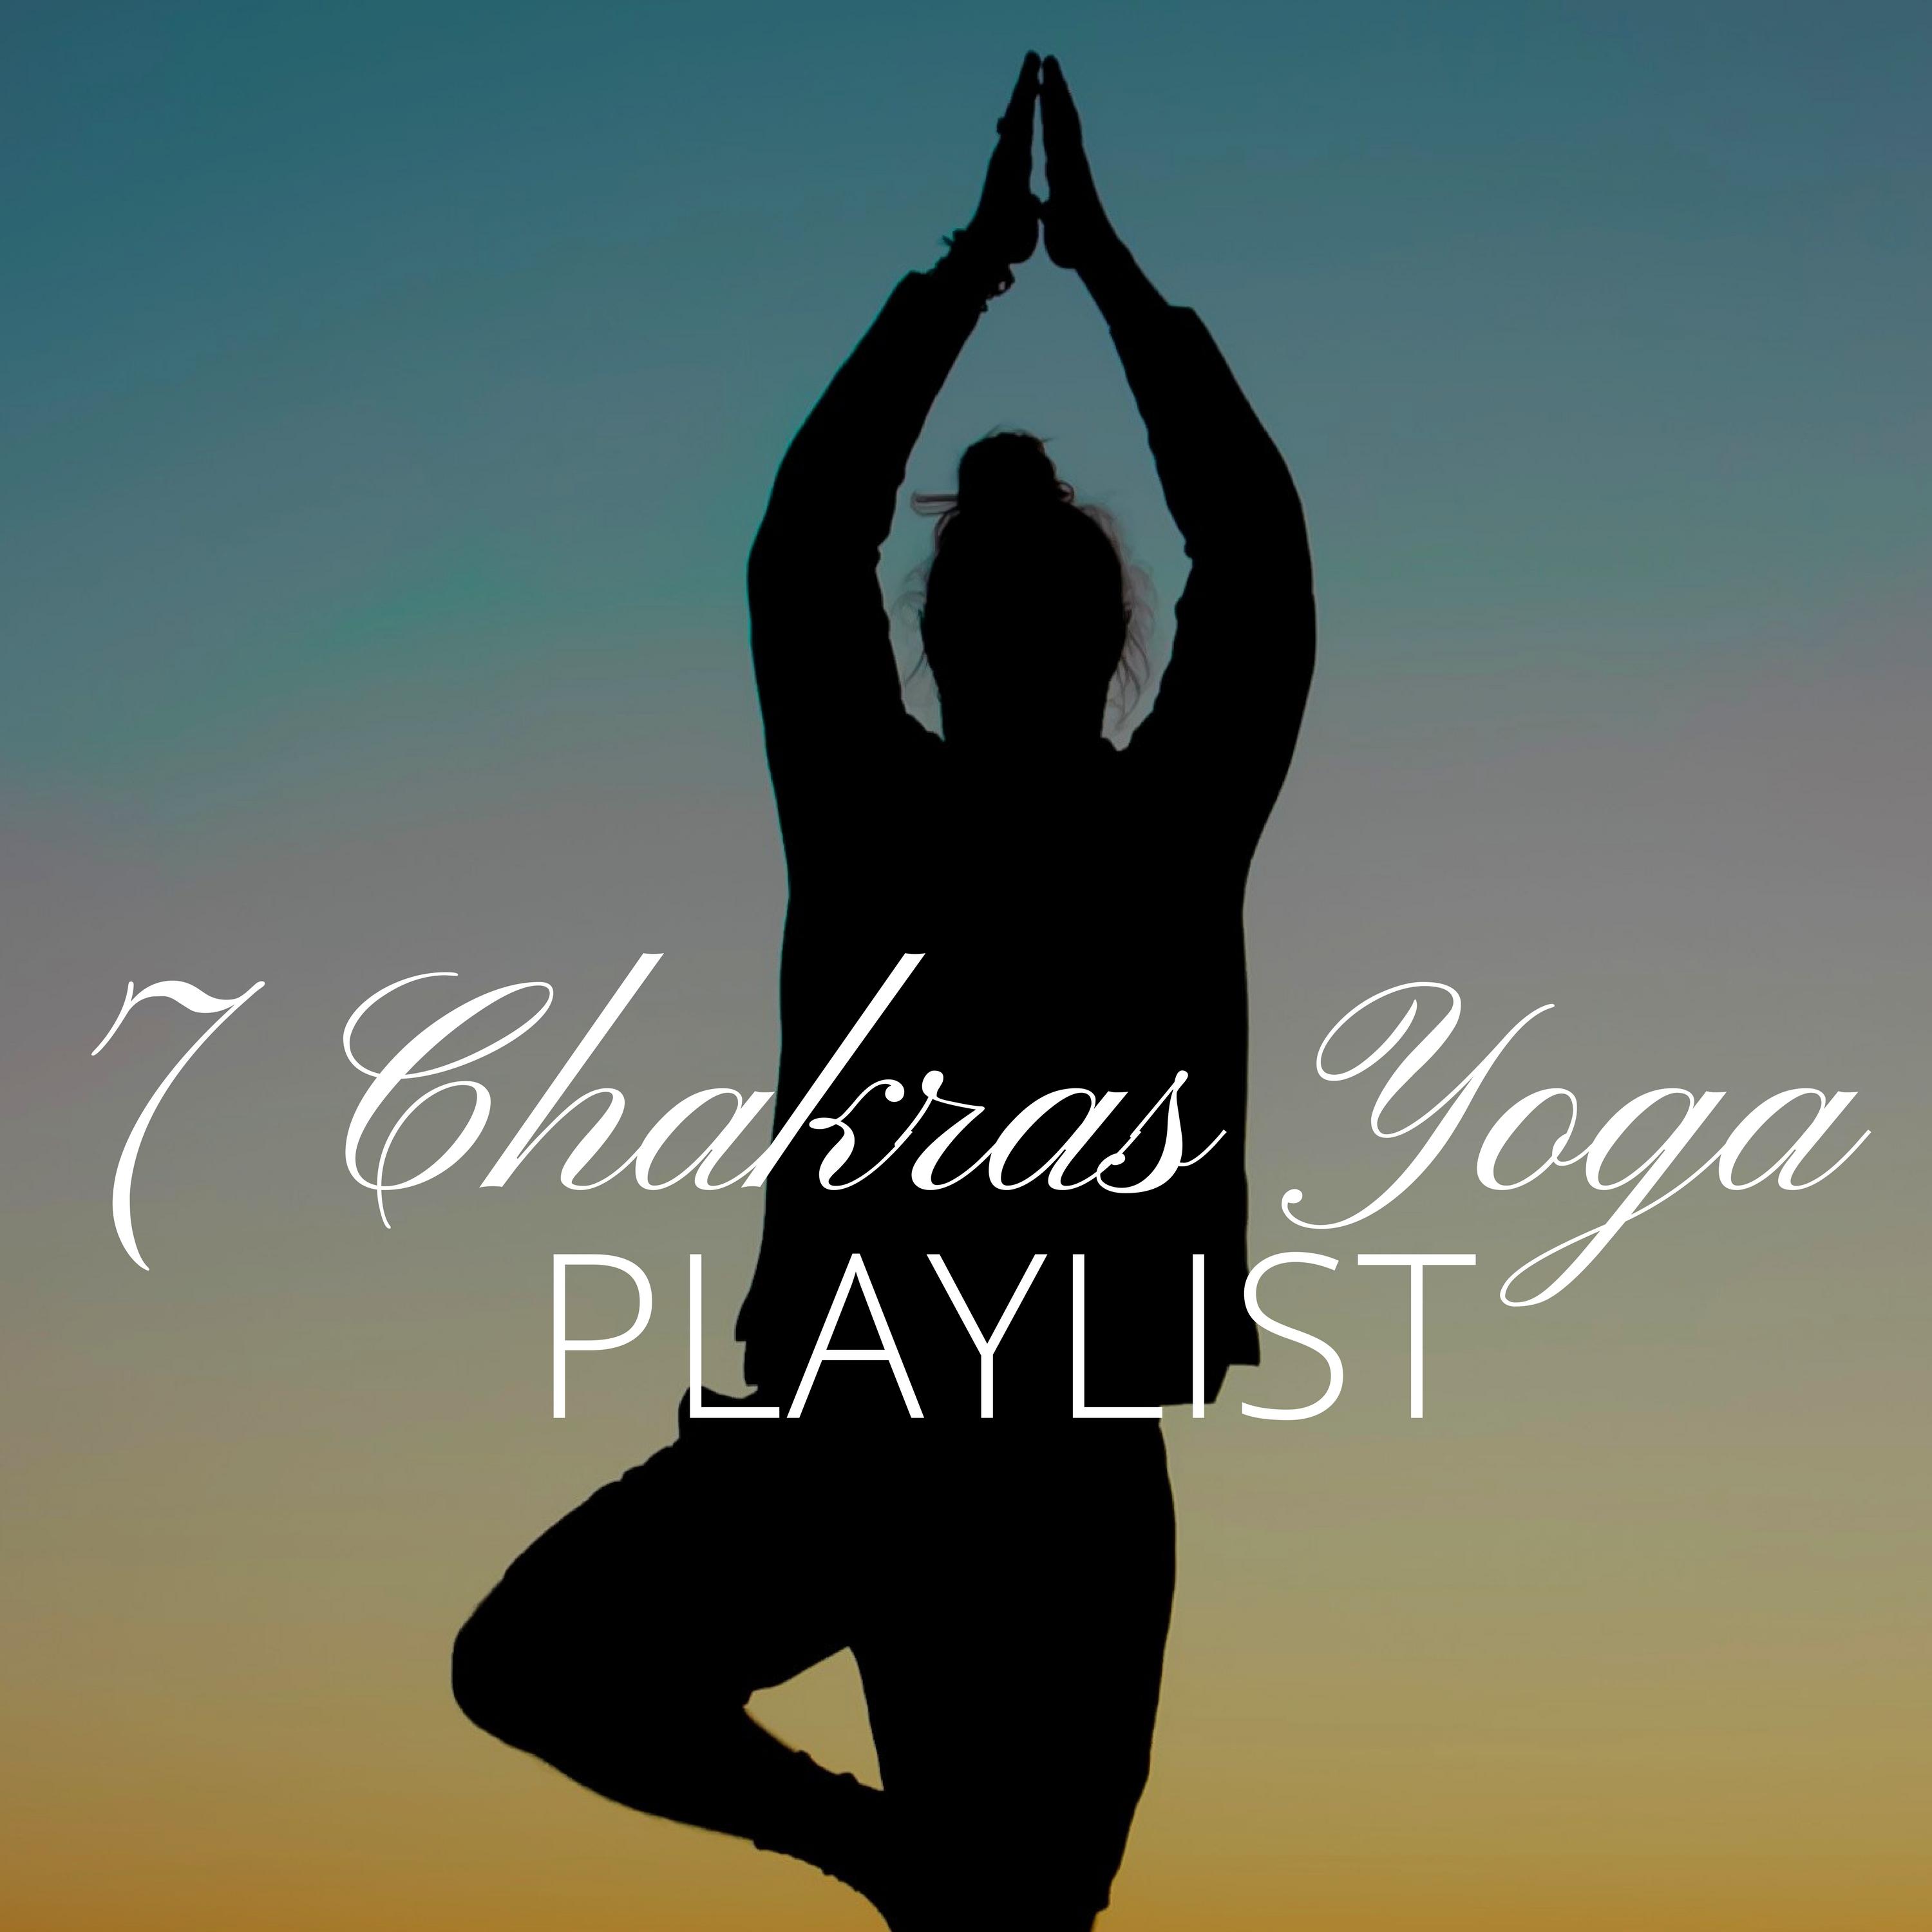 7 Chakras Yoga Playlist - Yoga Music Mp3 for Exercises in Everyday Living